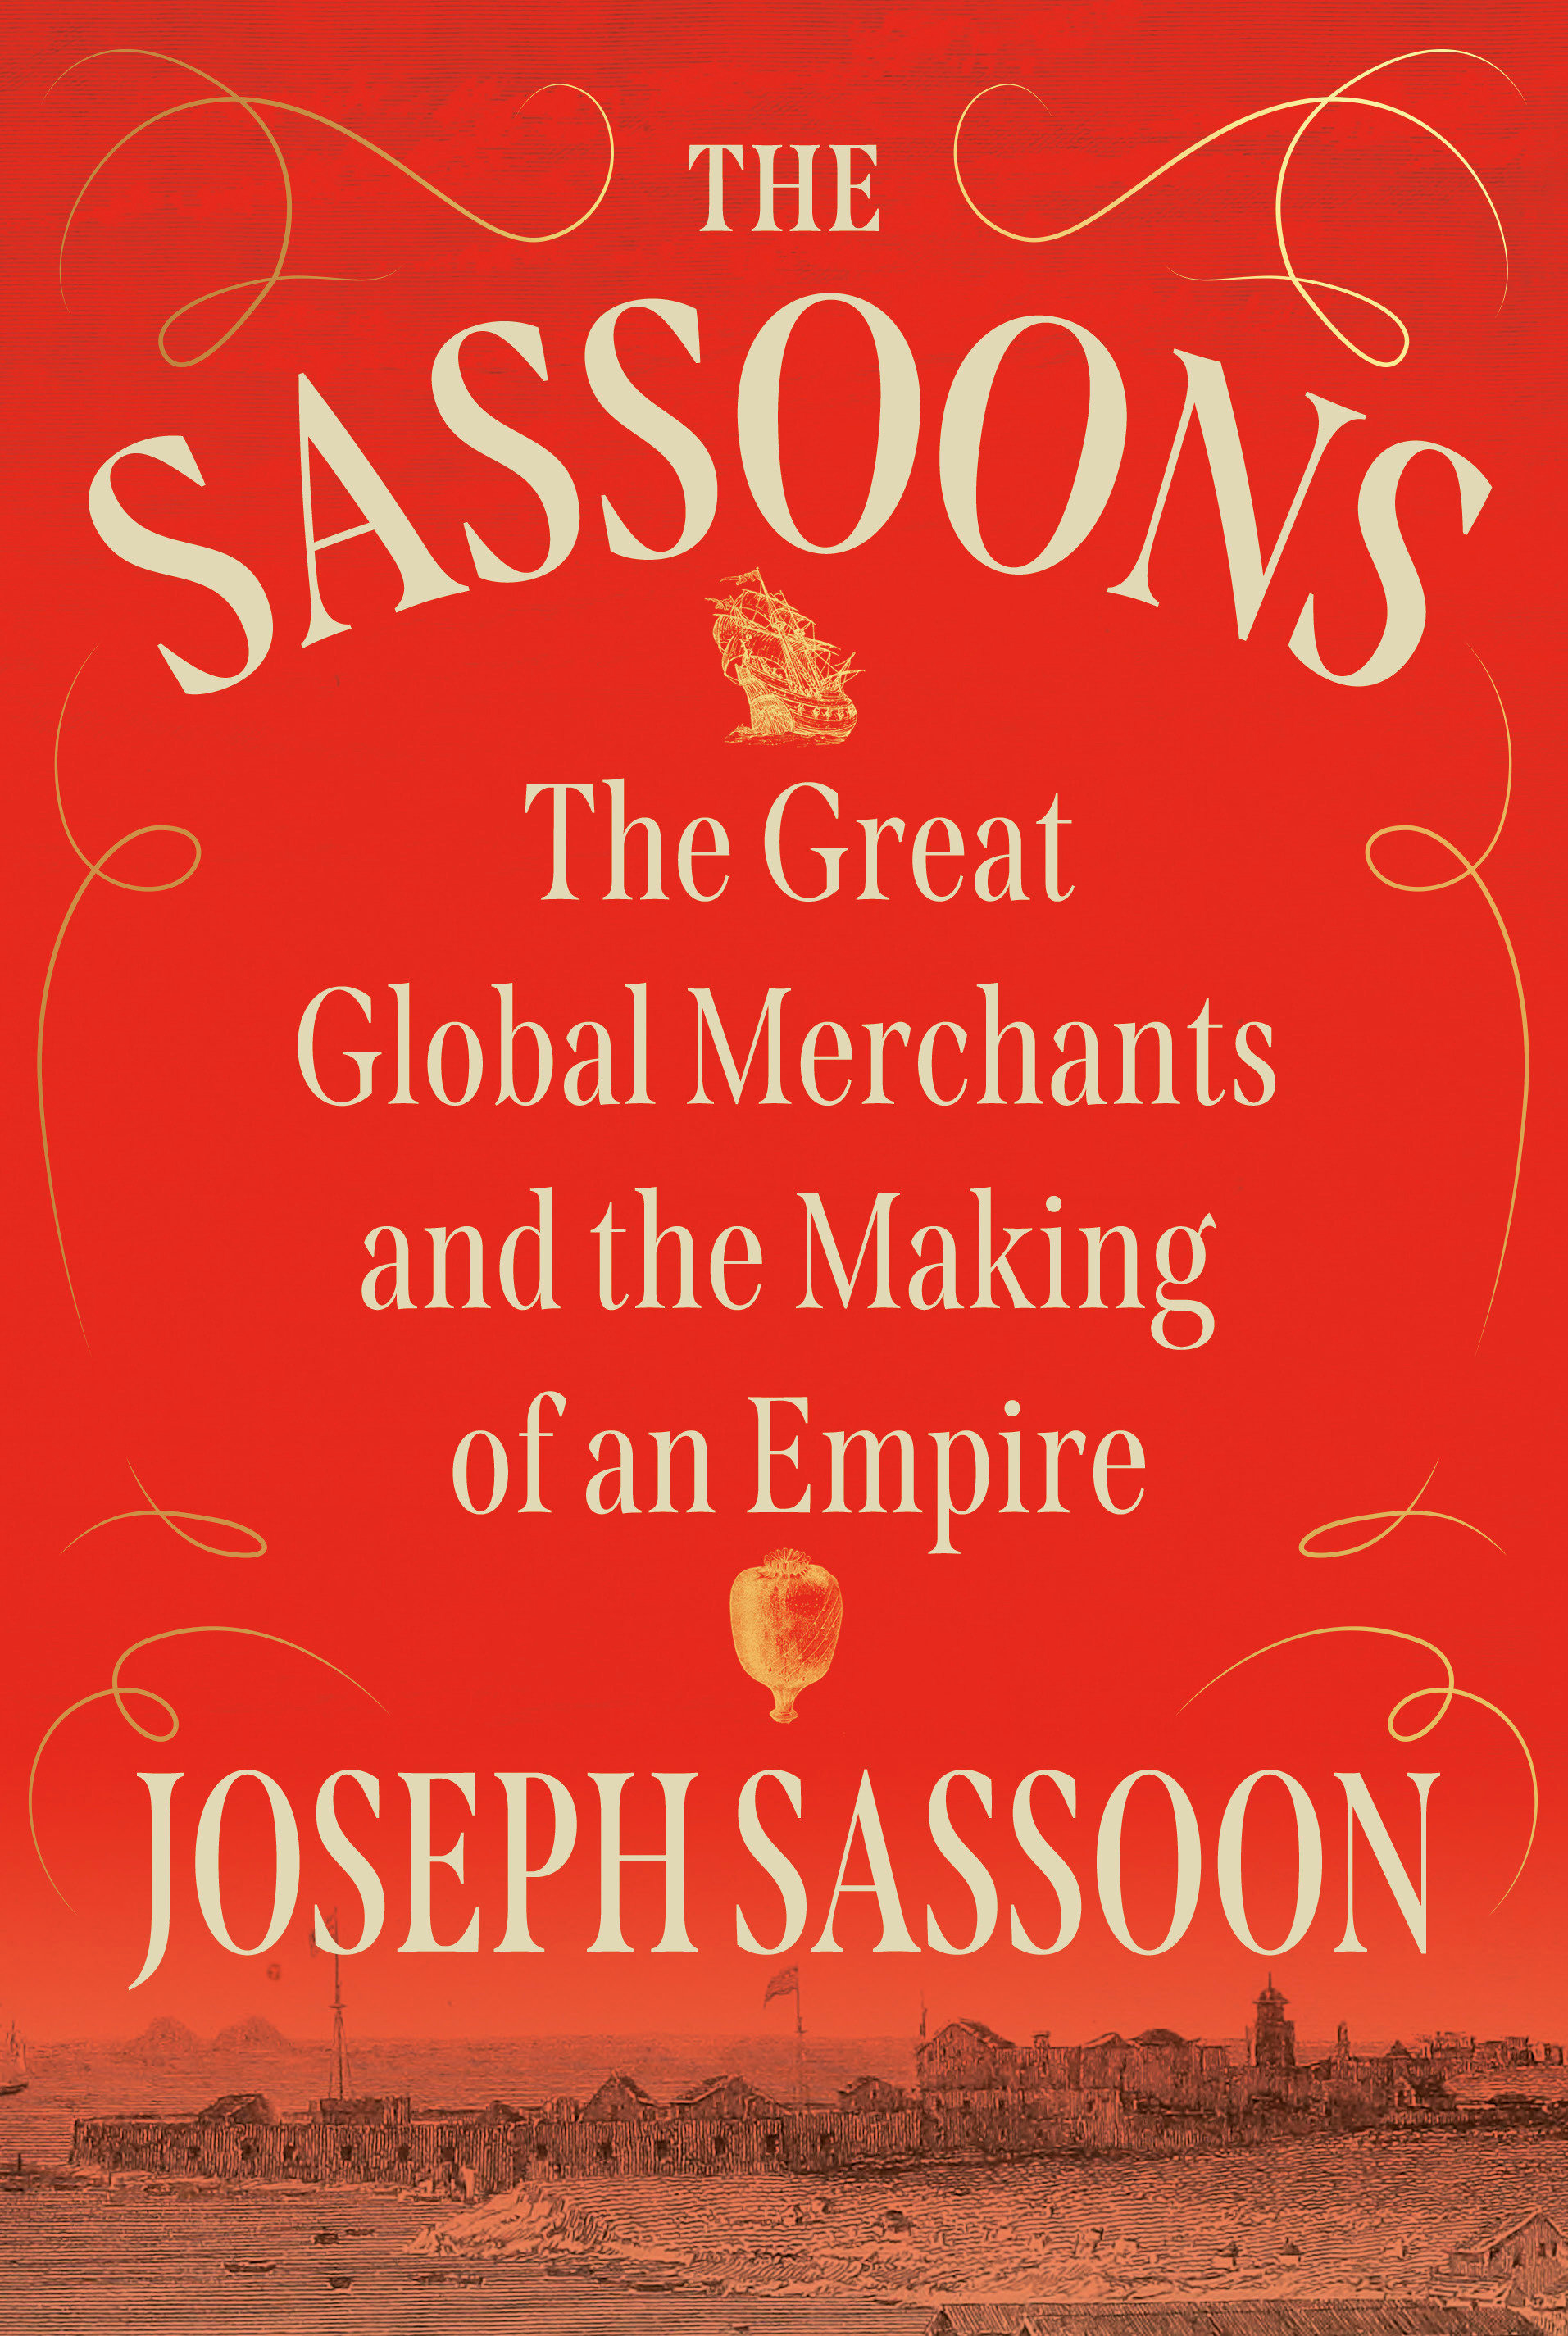 The Sassoons (Hardcover Book)